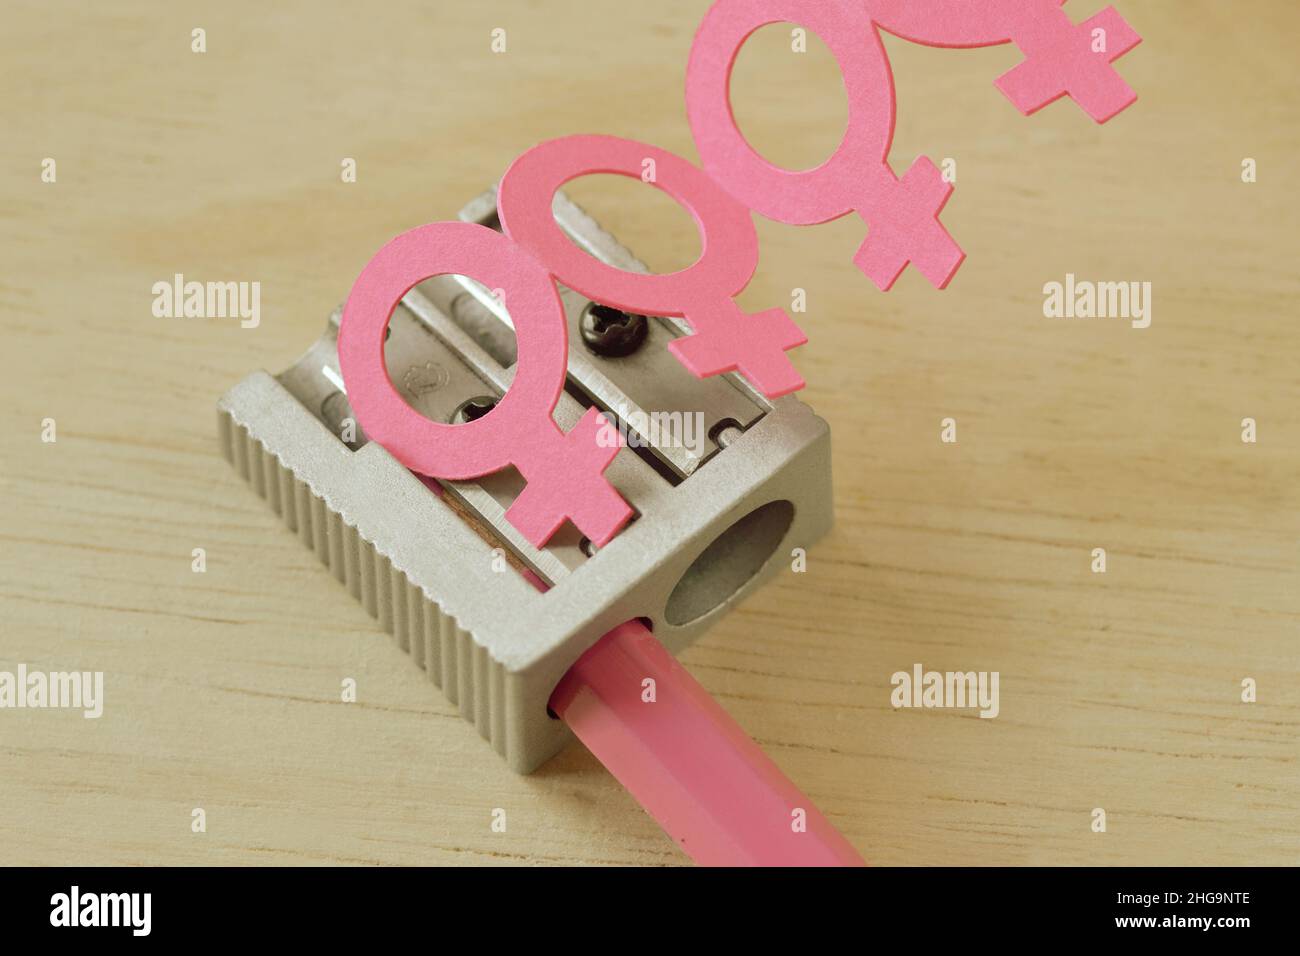 Sharpener and pink pencil with female gender symbol chain - Concept of women and creative thinking Stock Photo